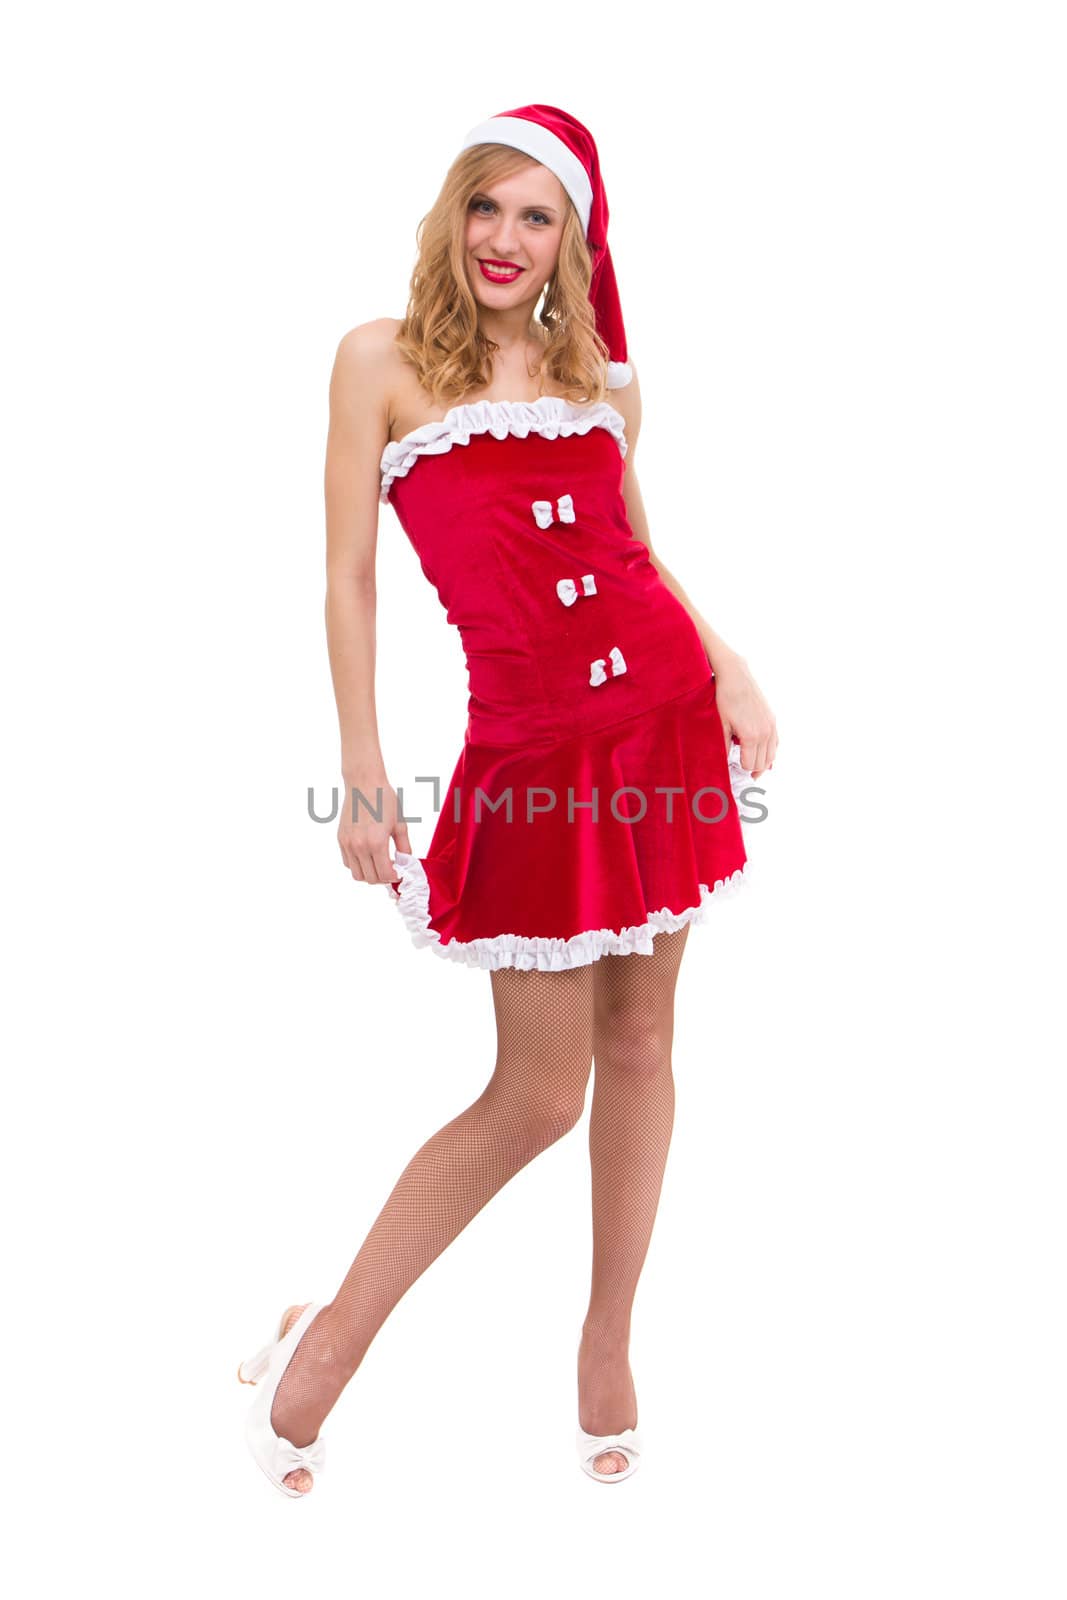 woman wearing santa claus clothes posing against isolated white background